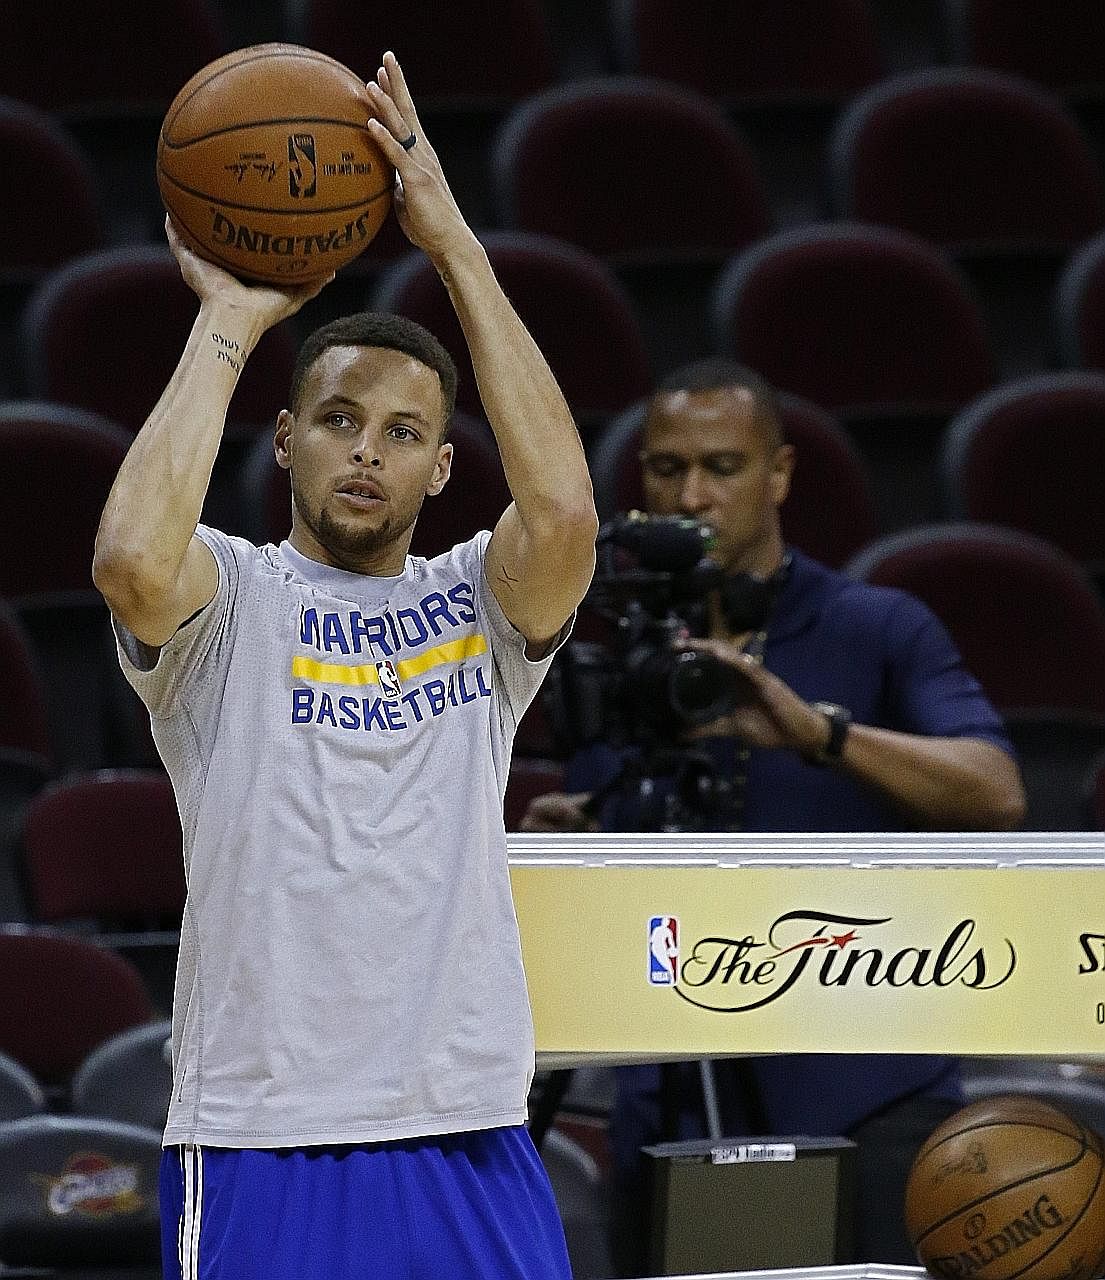 A pensive Golden State Warriors point guard Stephen Curry in practice on Thursday in Cleveland, ahead of today's Game 4 against the Cavaliers. With the Warriors' Finals series lead cut to 2-1, pressure is mounting for the two-time Most Valuable Playe